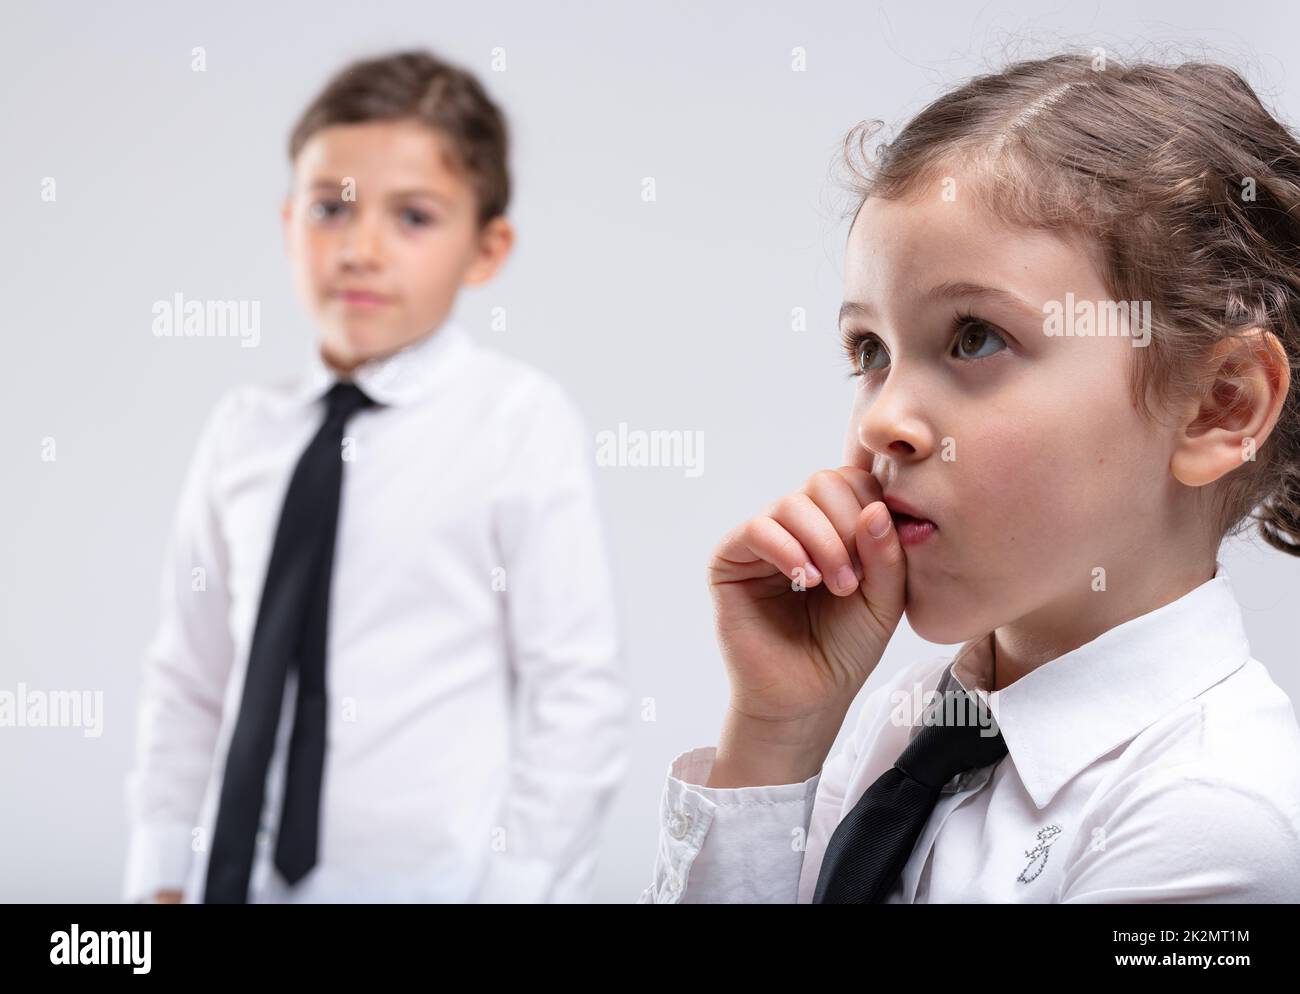 Thoughtful little girl with hand to mouth Stock Photo